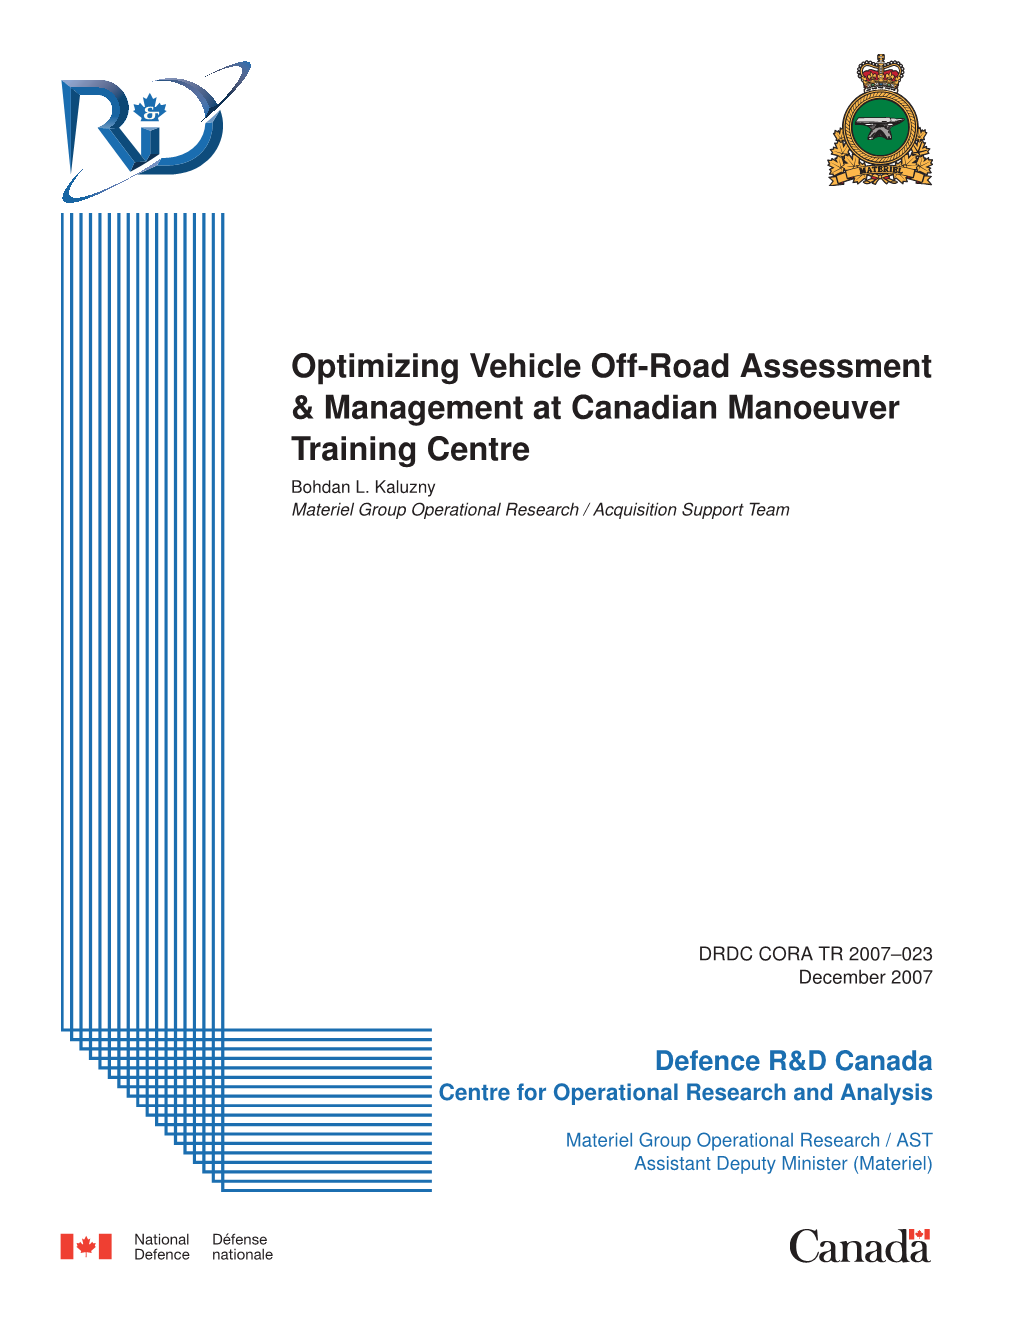 Optimizing Vehicle Off-Road Assessment & Management At